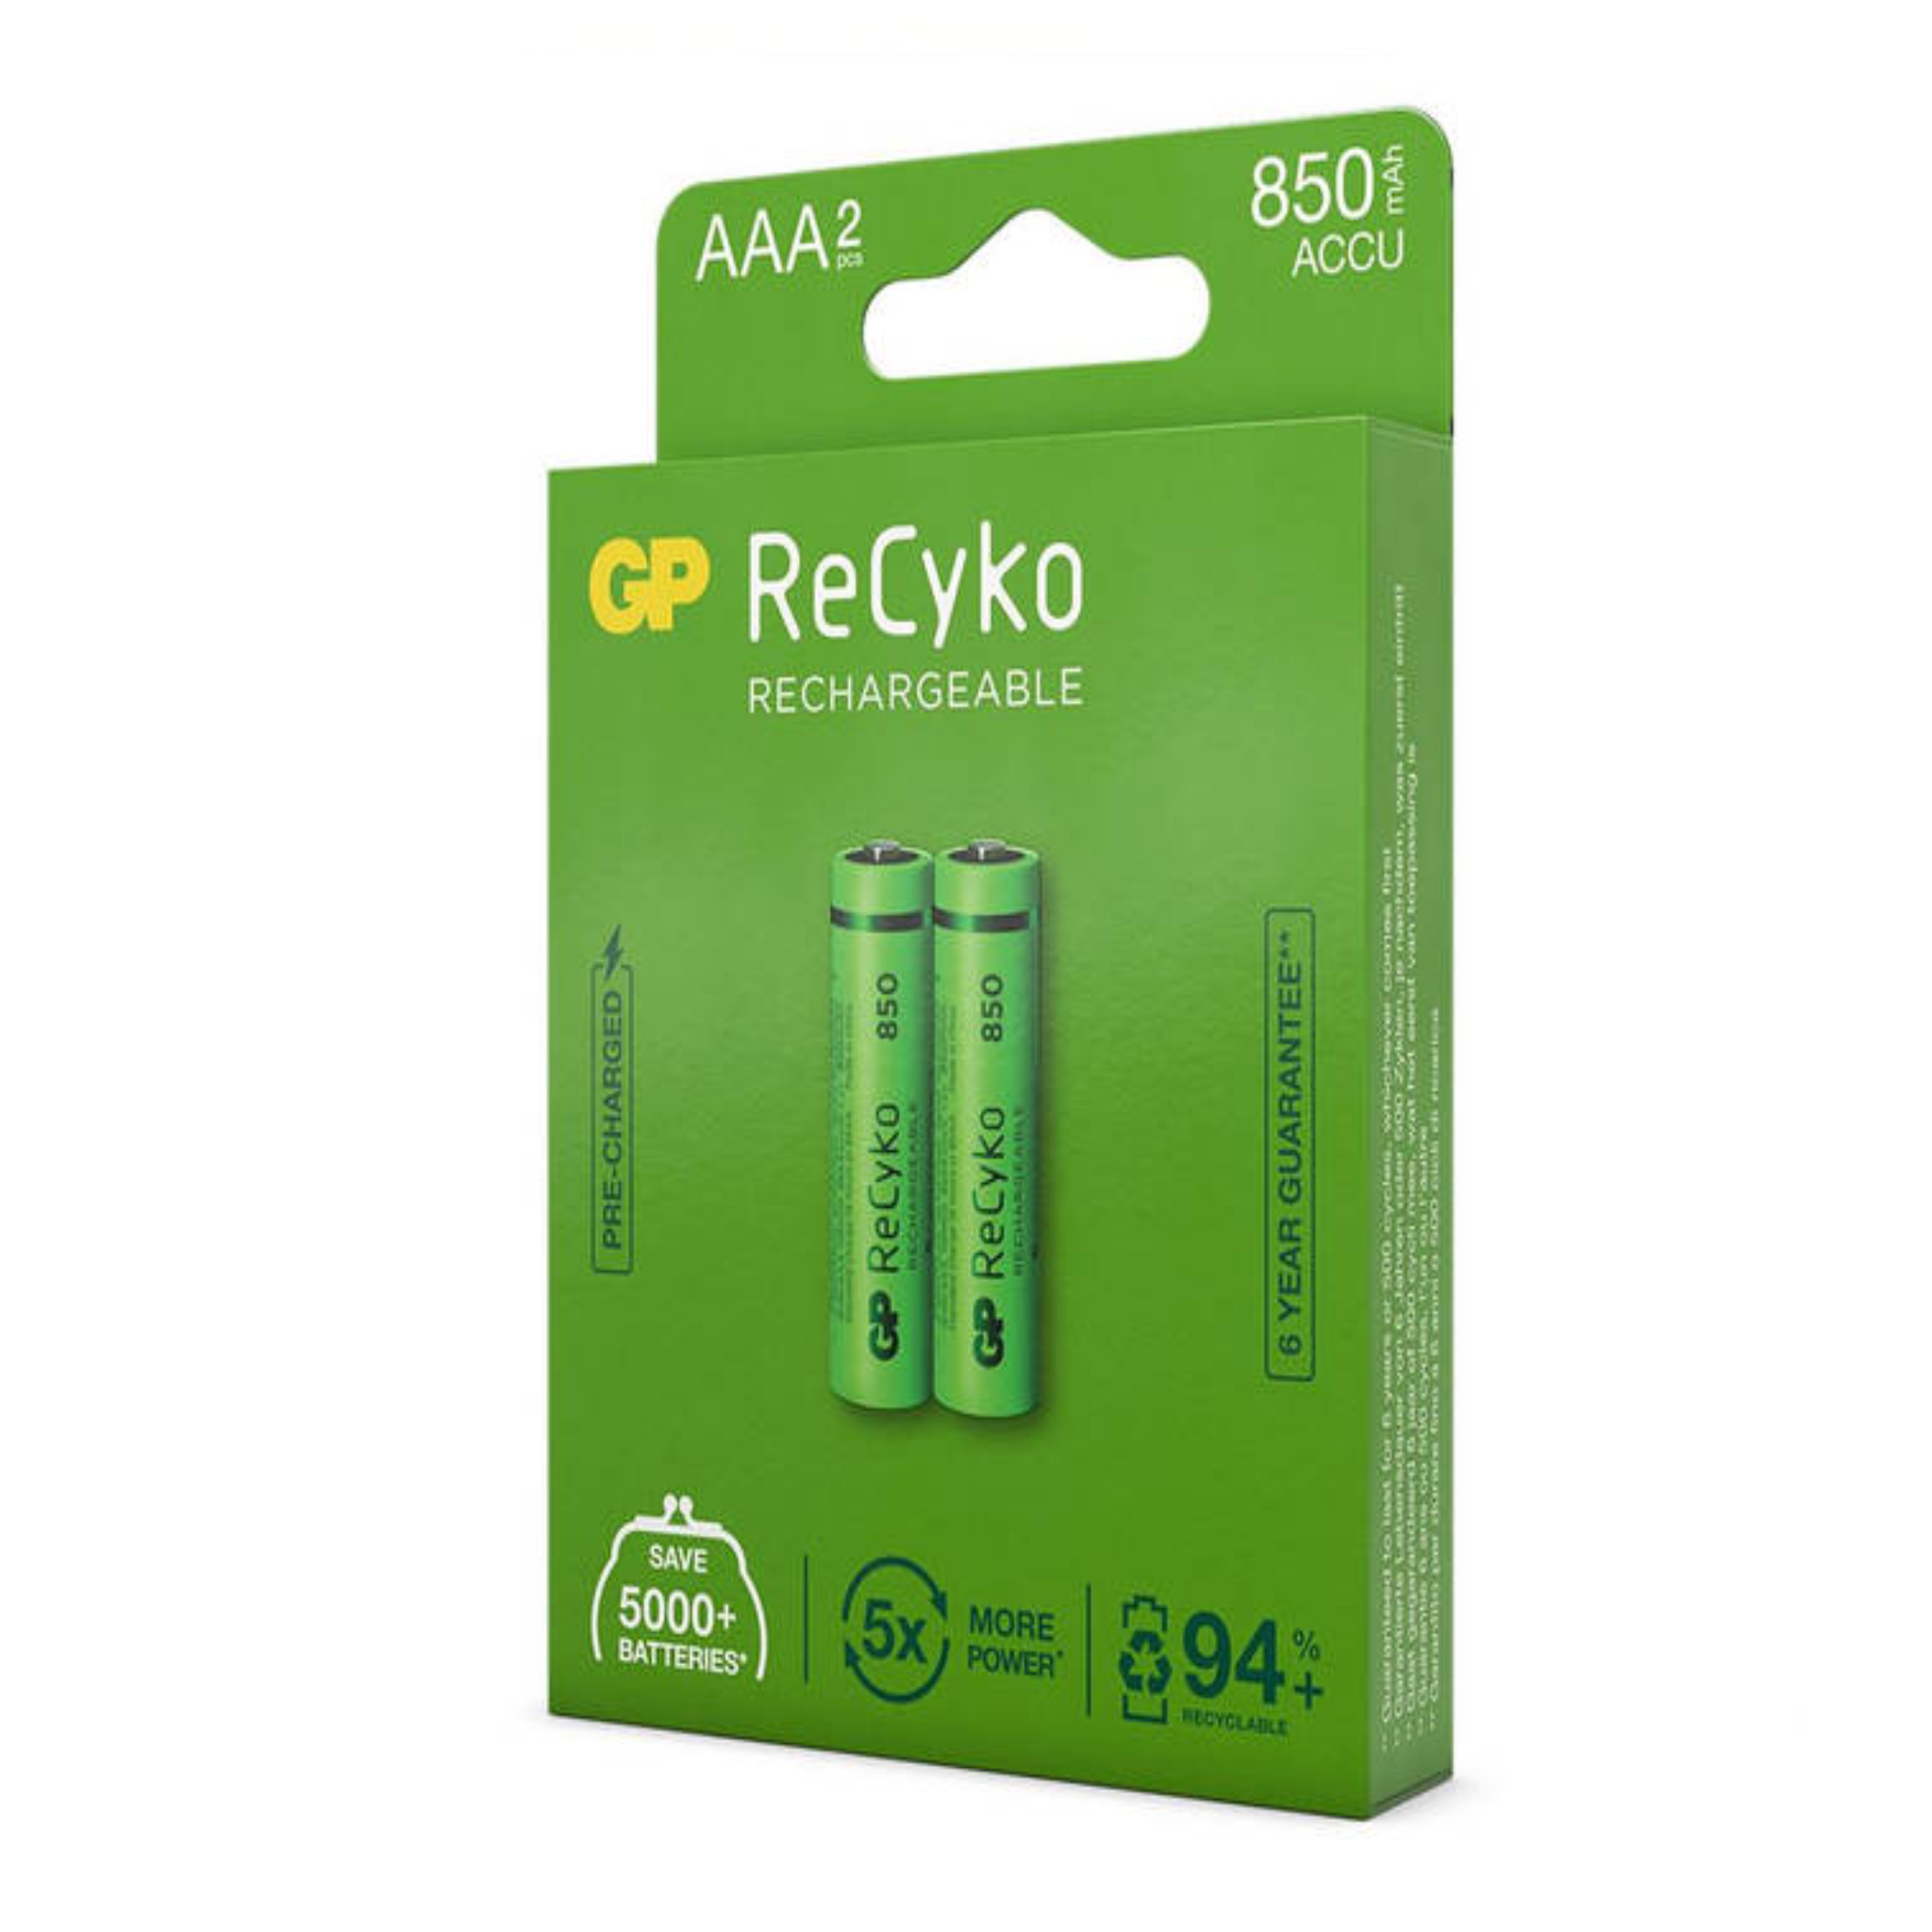 GP ReCyko Rechargeable Battery AAA 2PC/Pack 850mAh